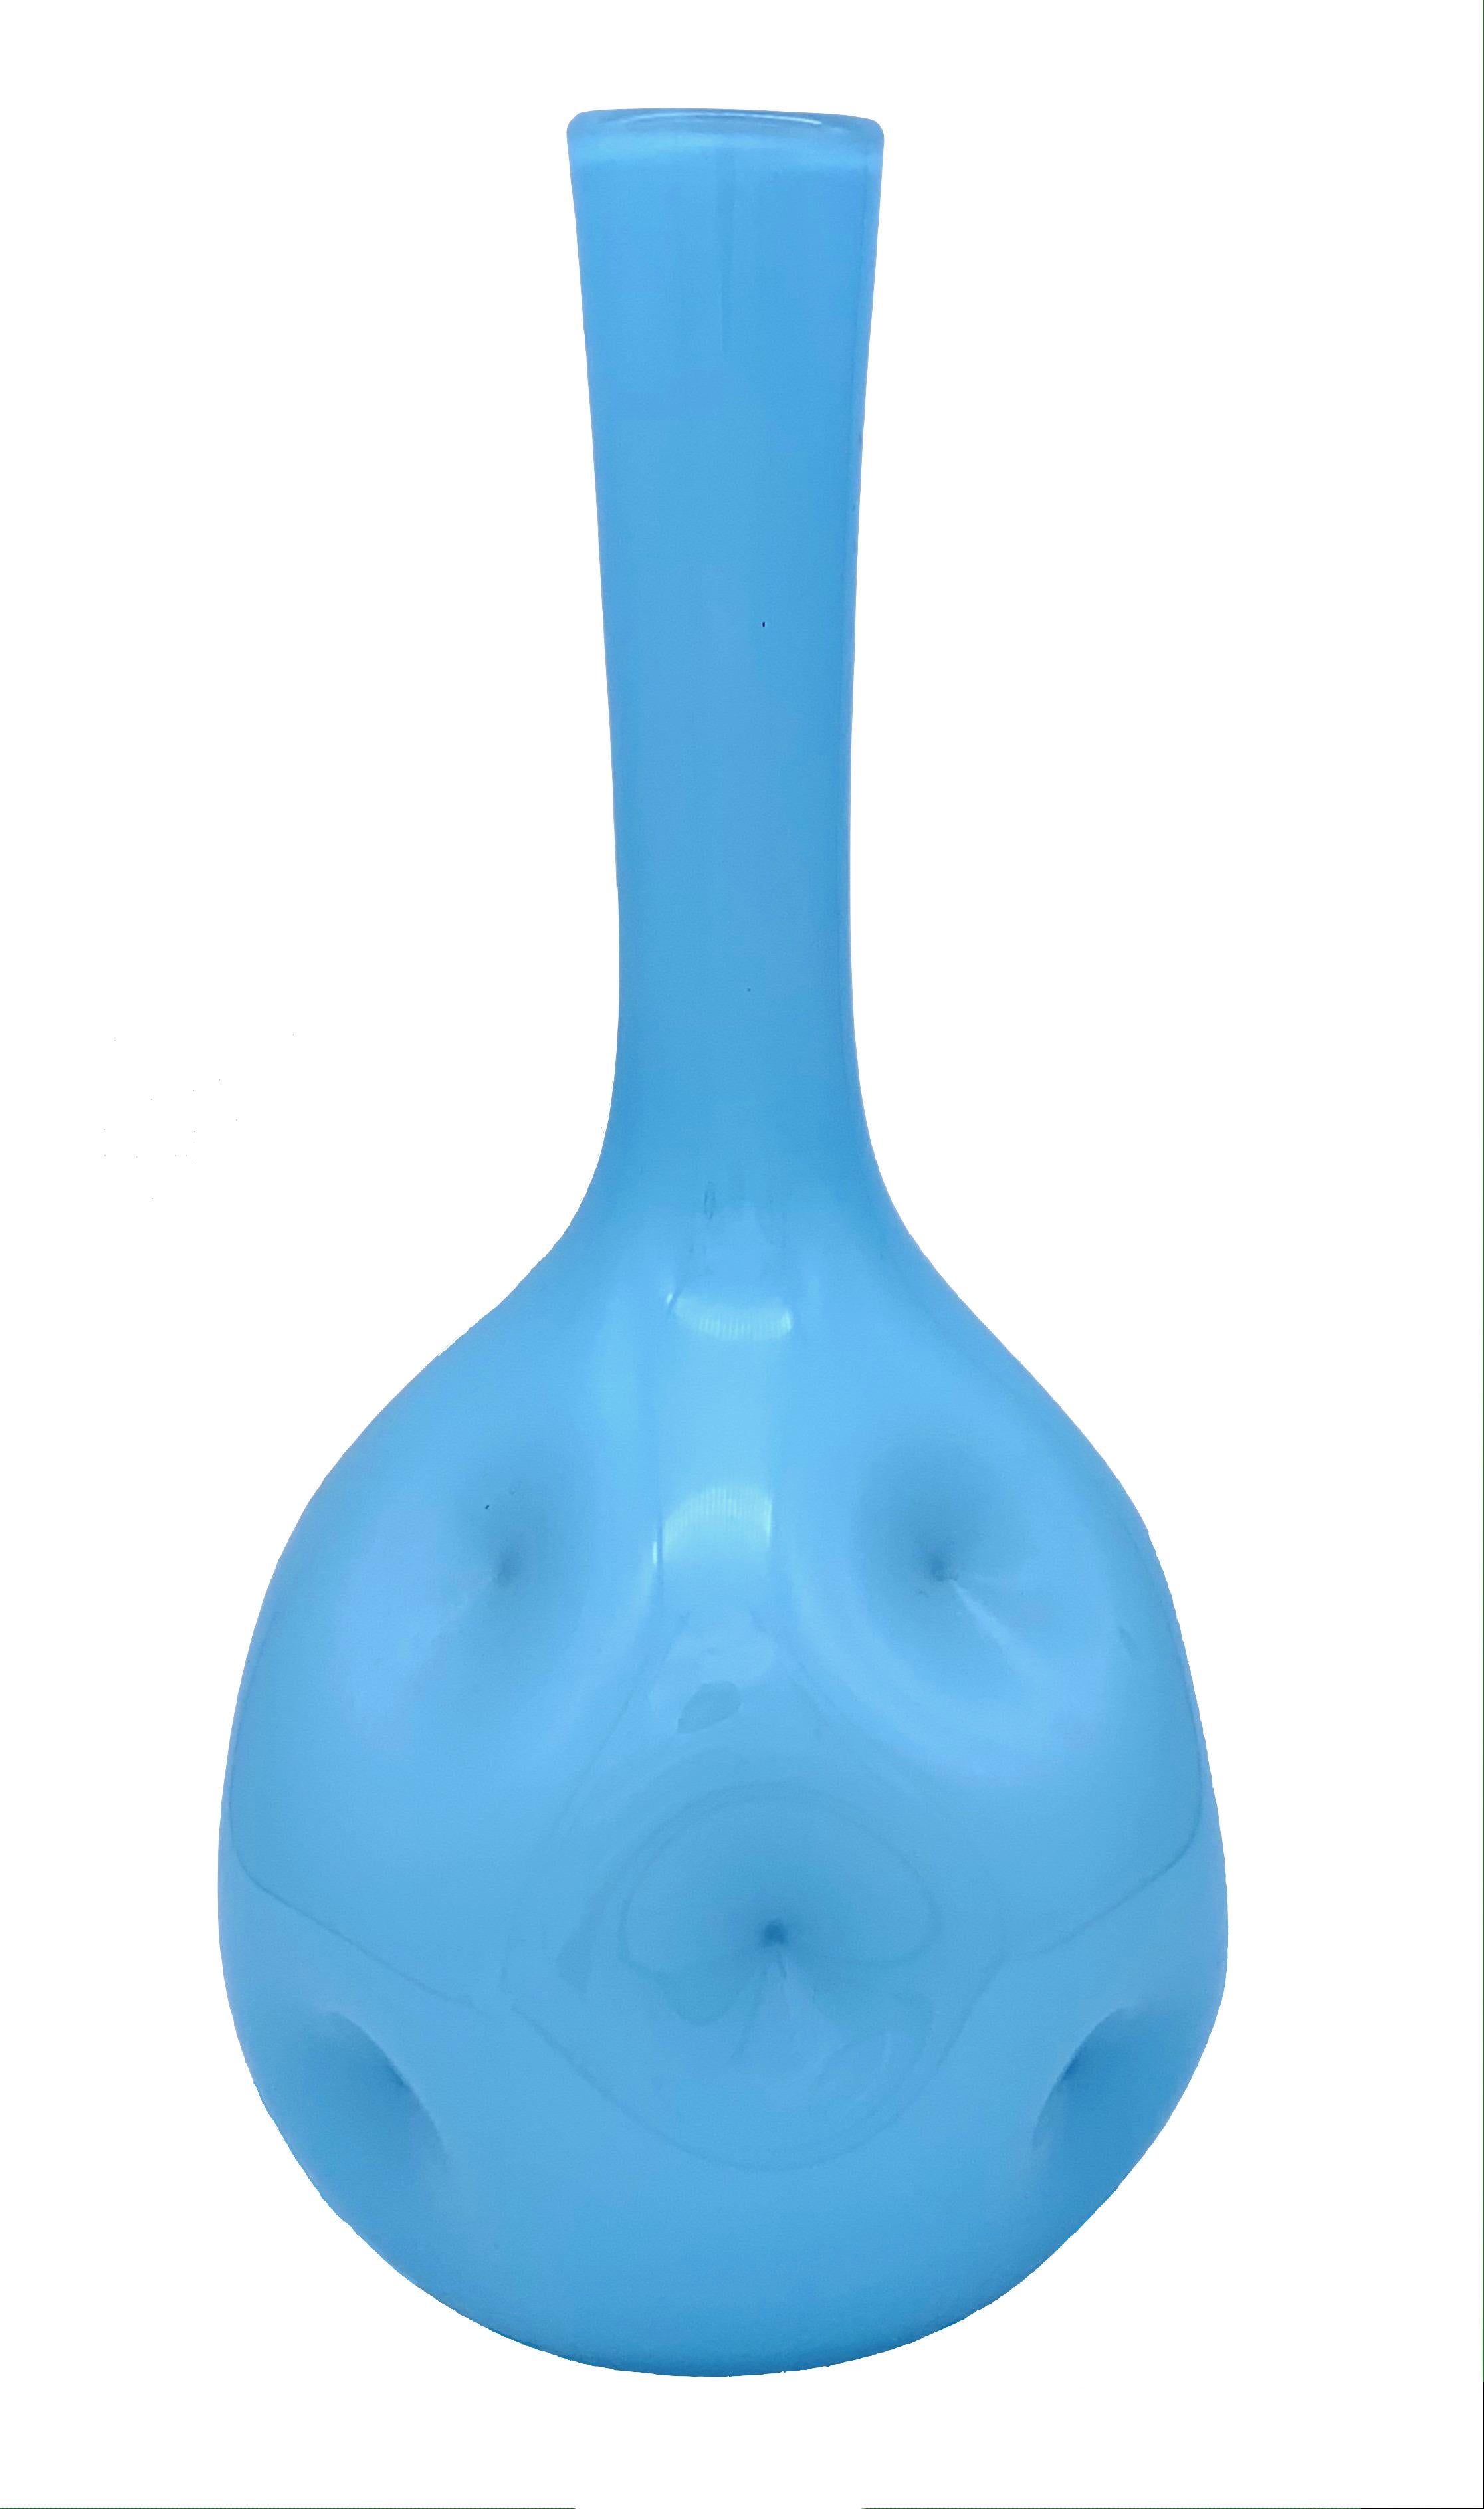 This lovely piece of glas with it's wonderful dimples was hand blown under the blue skies of the Côte d'Azur.
The intensive light blue hue adds joy to any surrounding.